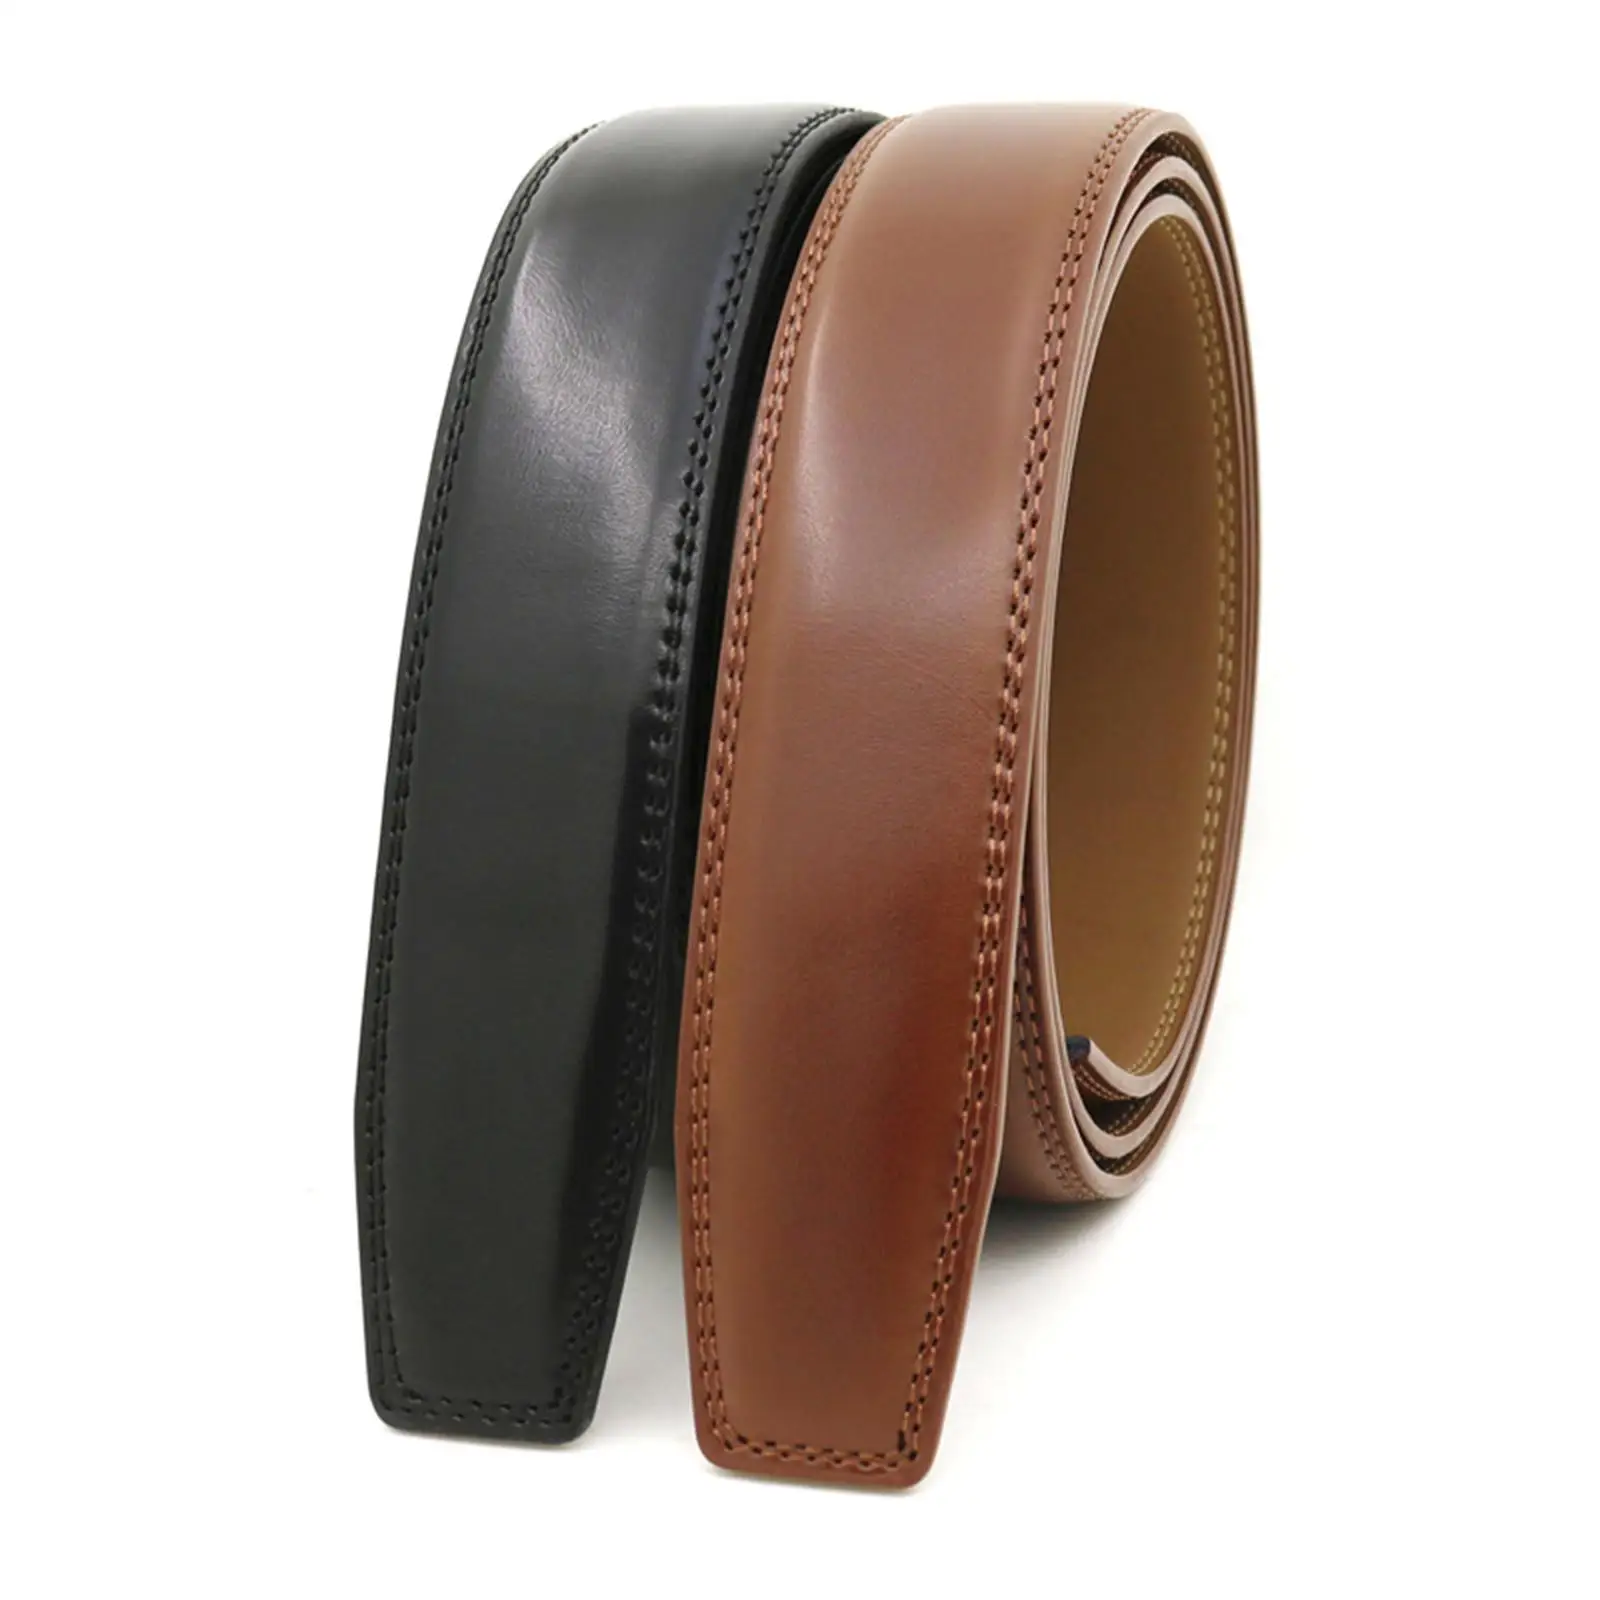 3.5cm Wide Leather Belt High Quality Without Automatic Buckle Strap for Men